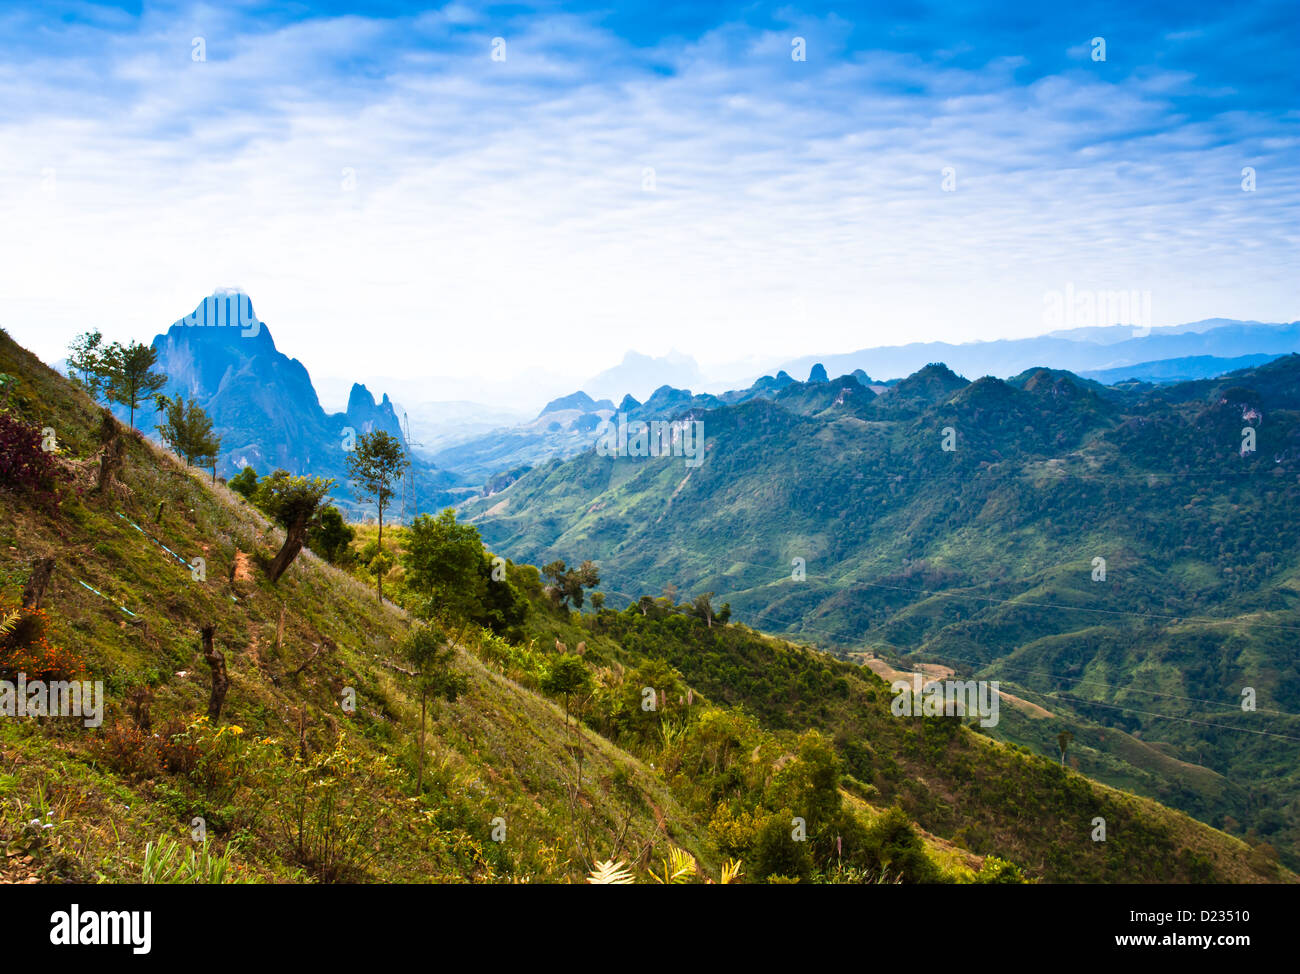 View on the mountain. Saw several mountain peaks. It is one of the suburban landscape in Laos. Stock Photo